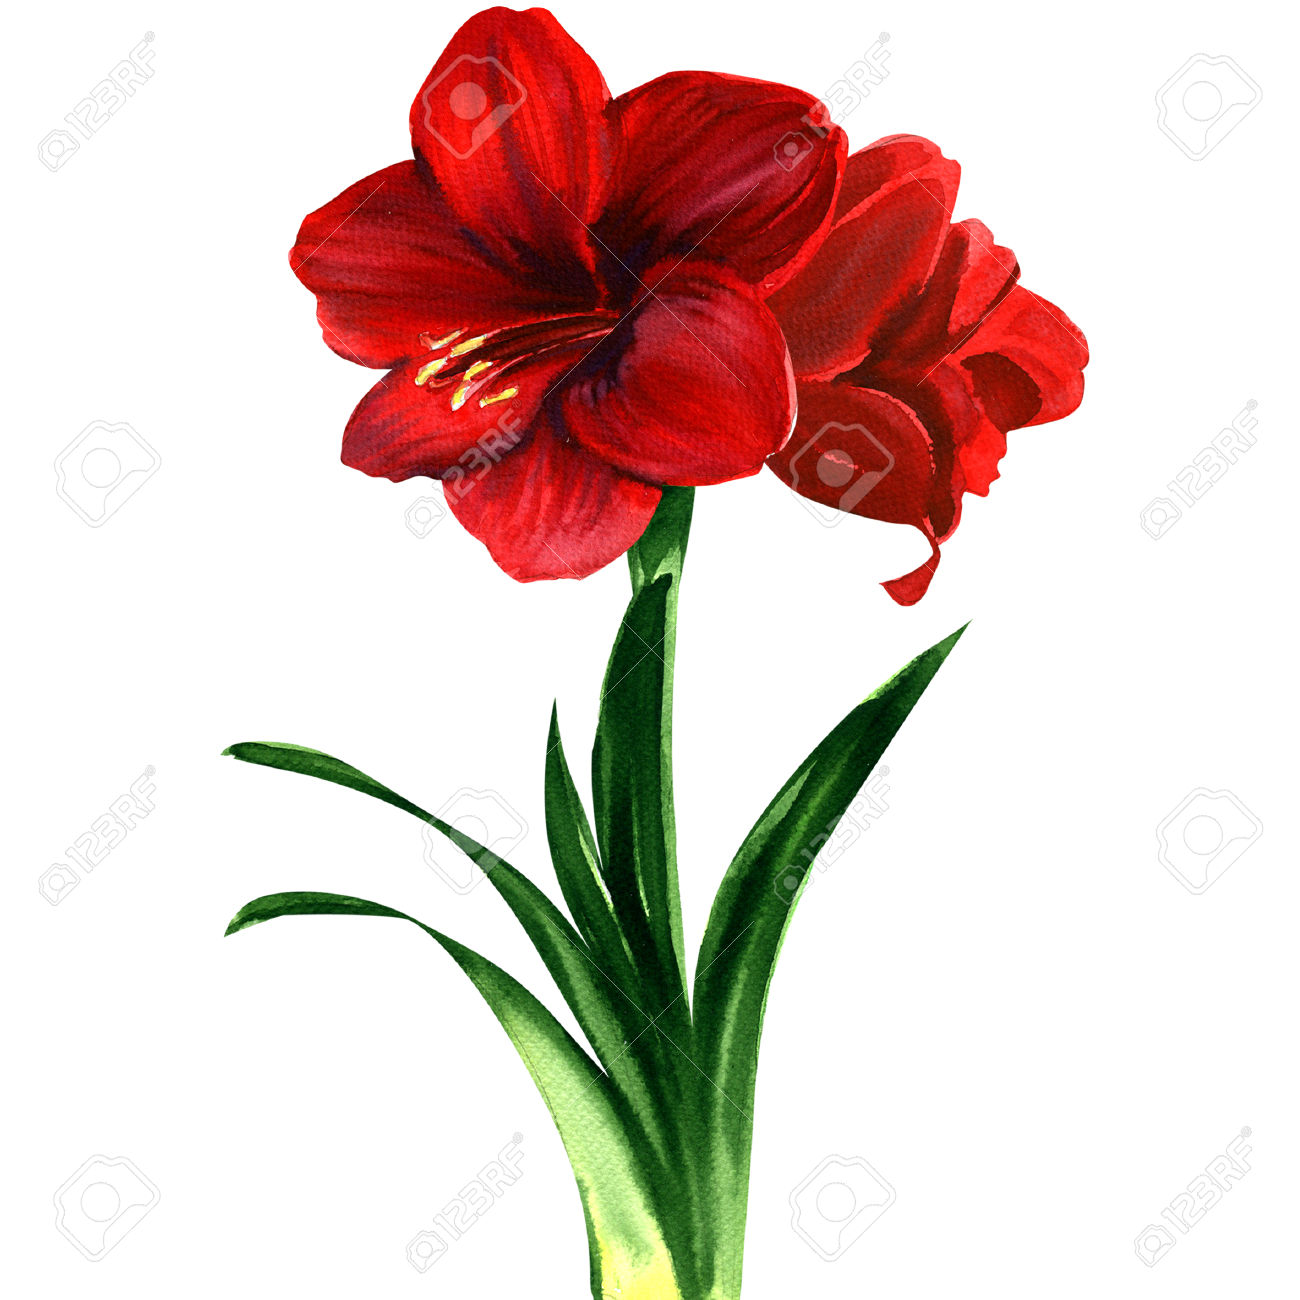 Amaryllis clipart #19, Download drawings